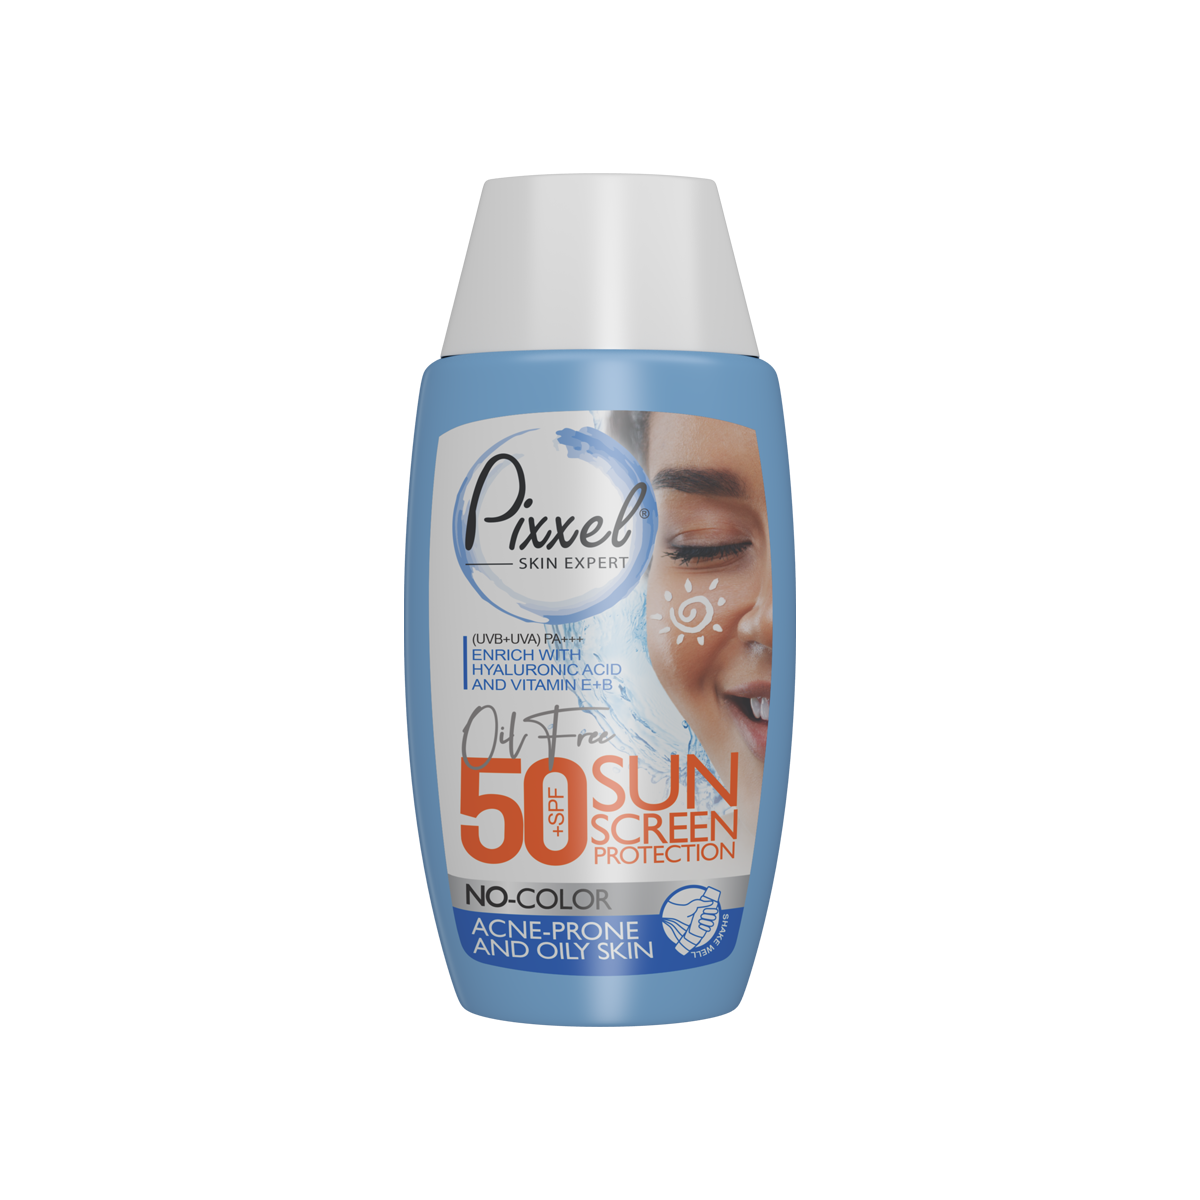 Pixxel No Color Sunscreen Protection For Oily Skin